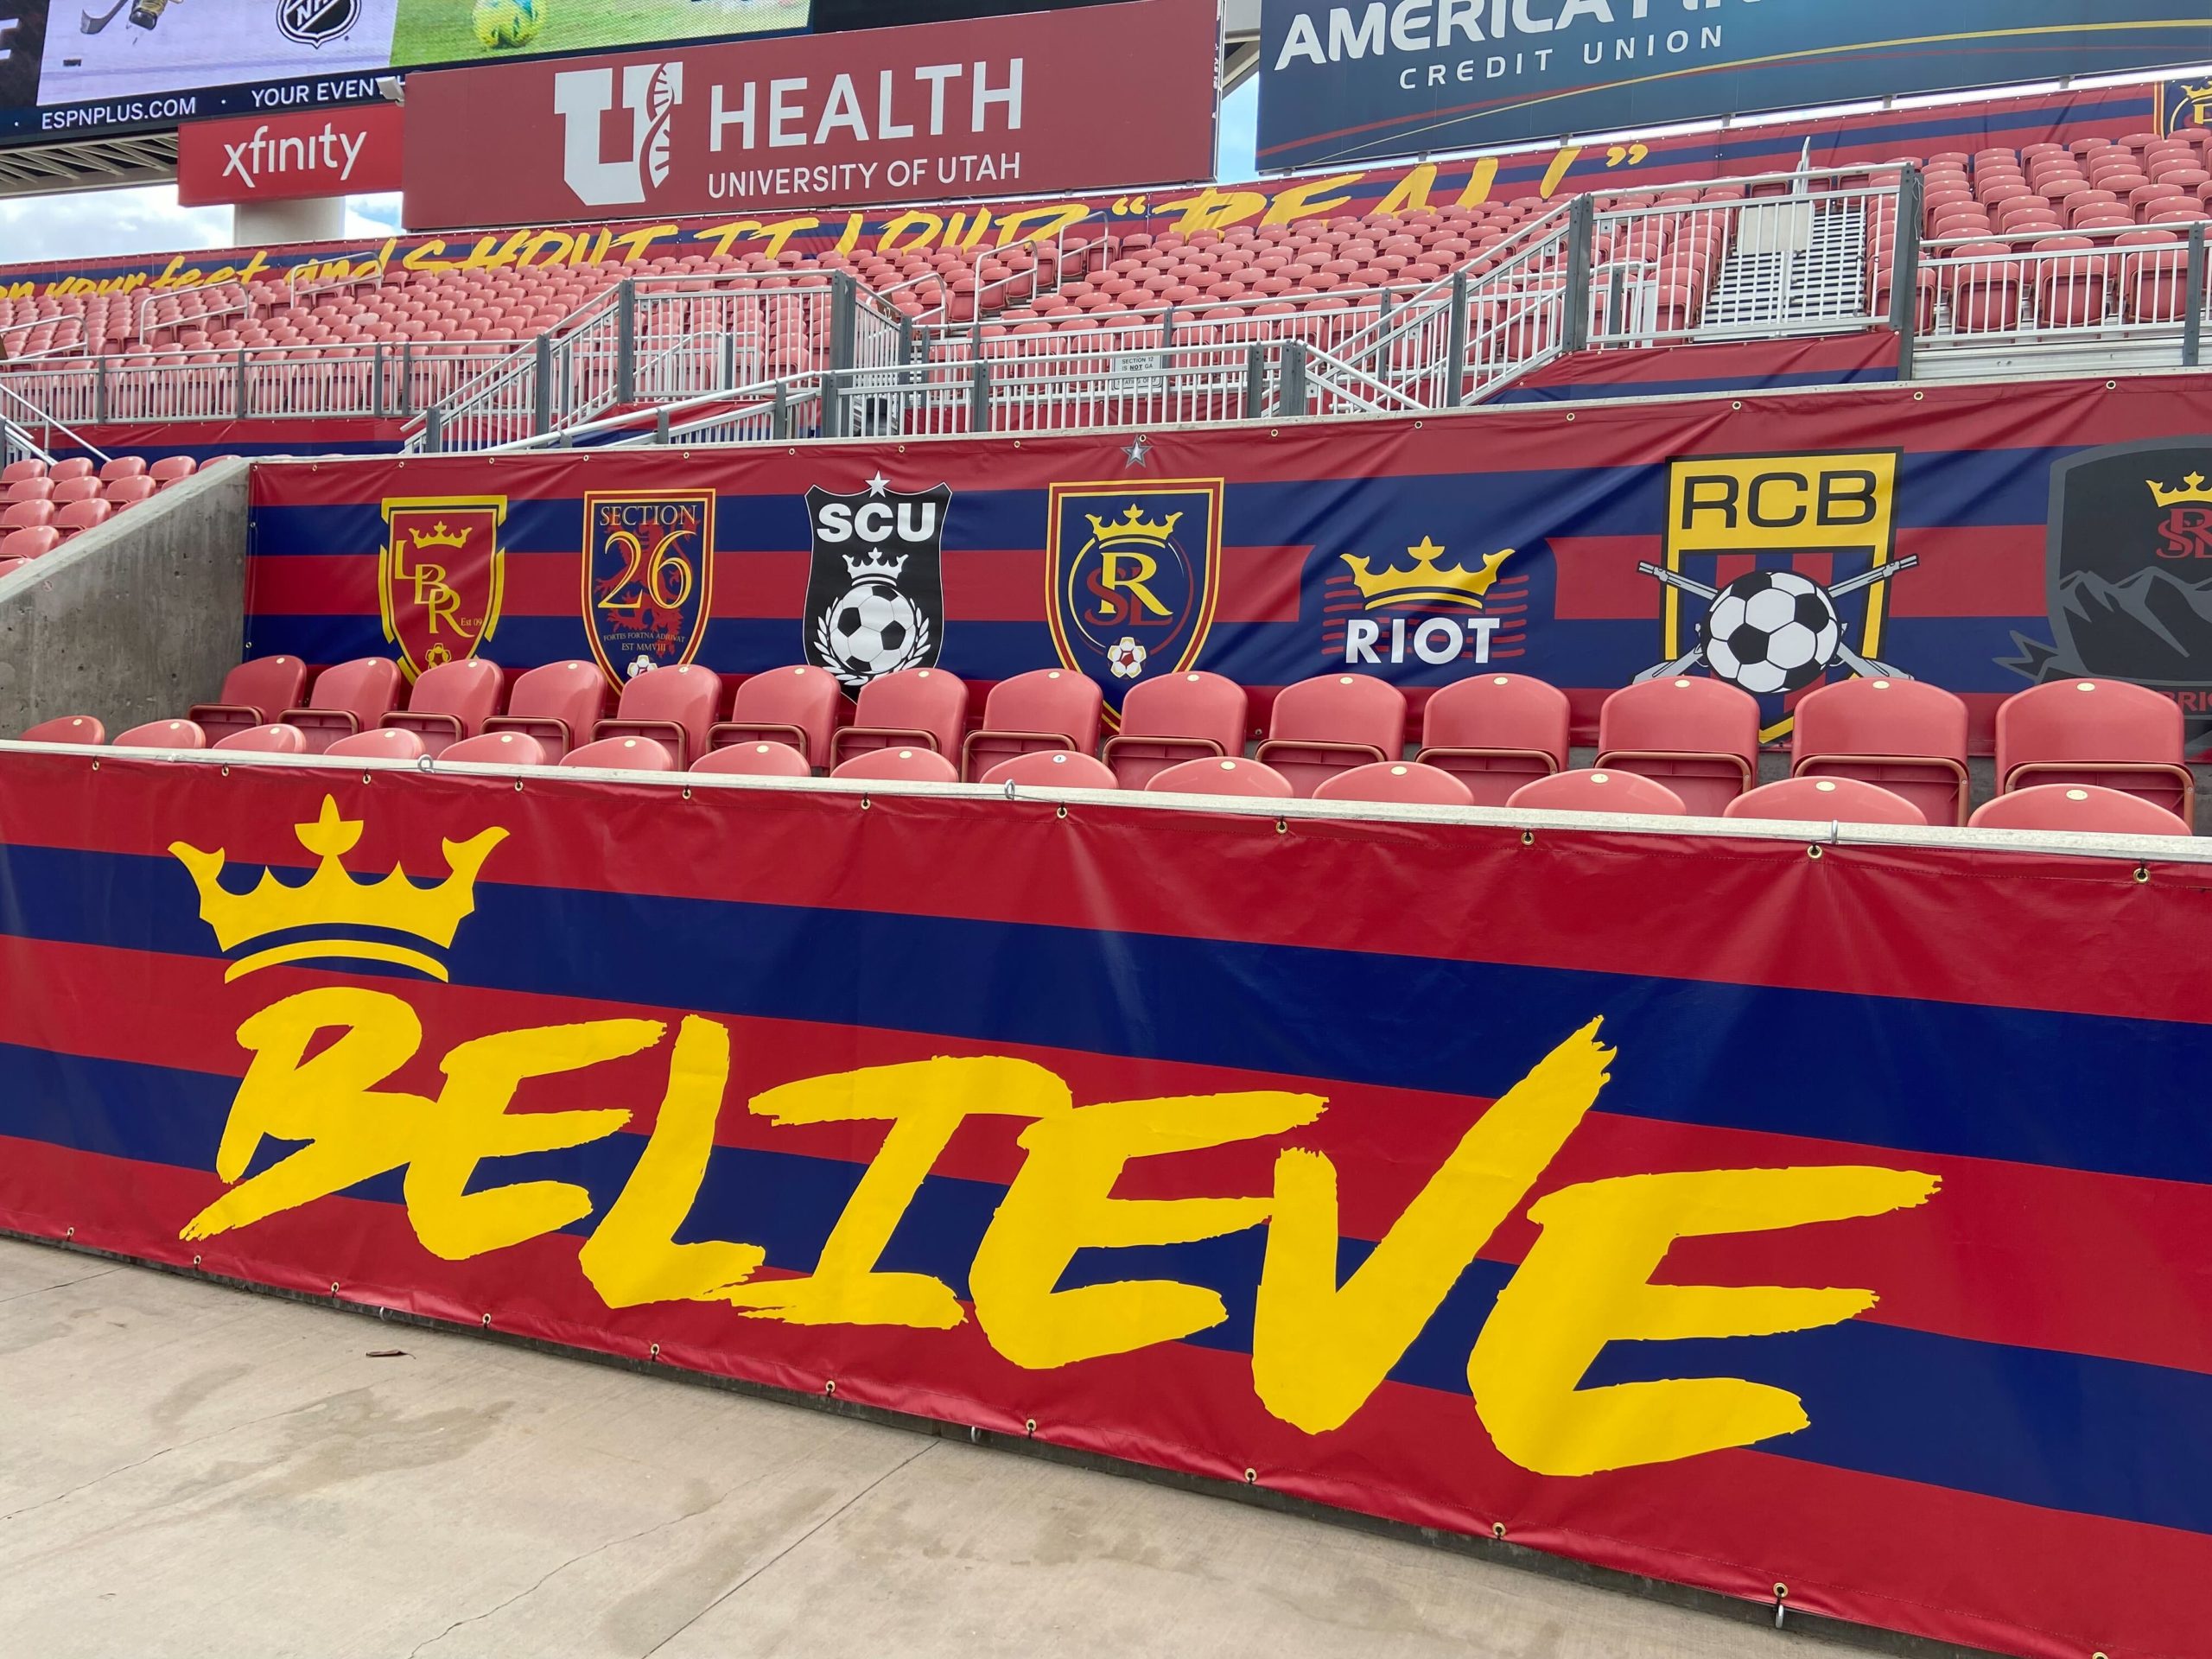 Real Salt Lake "Believe" banner in the RioT.